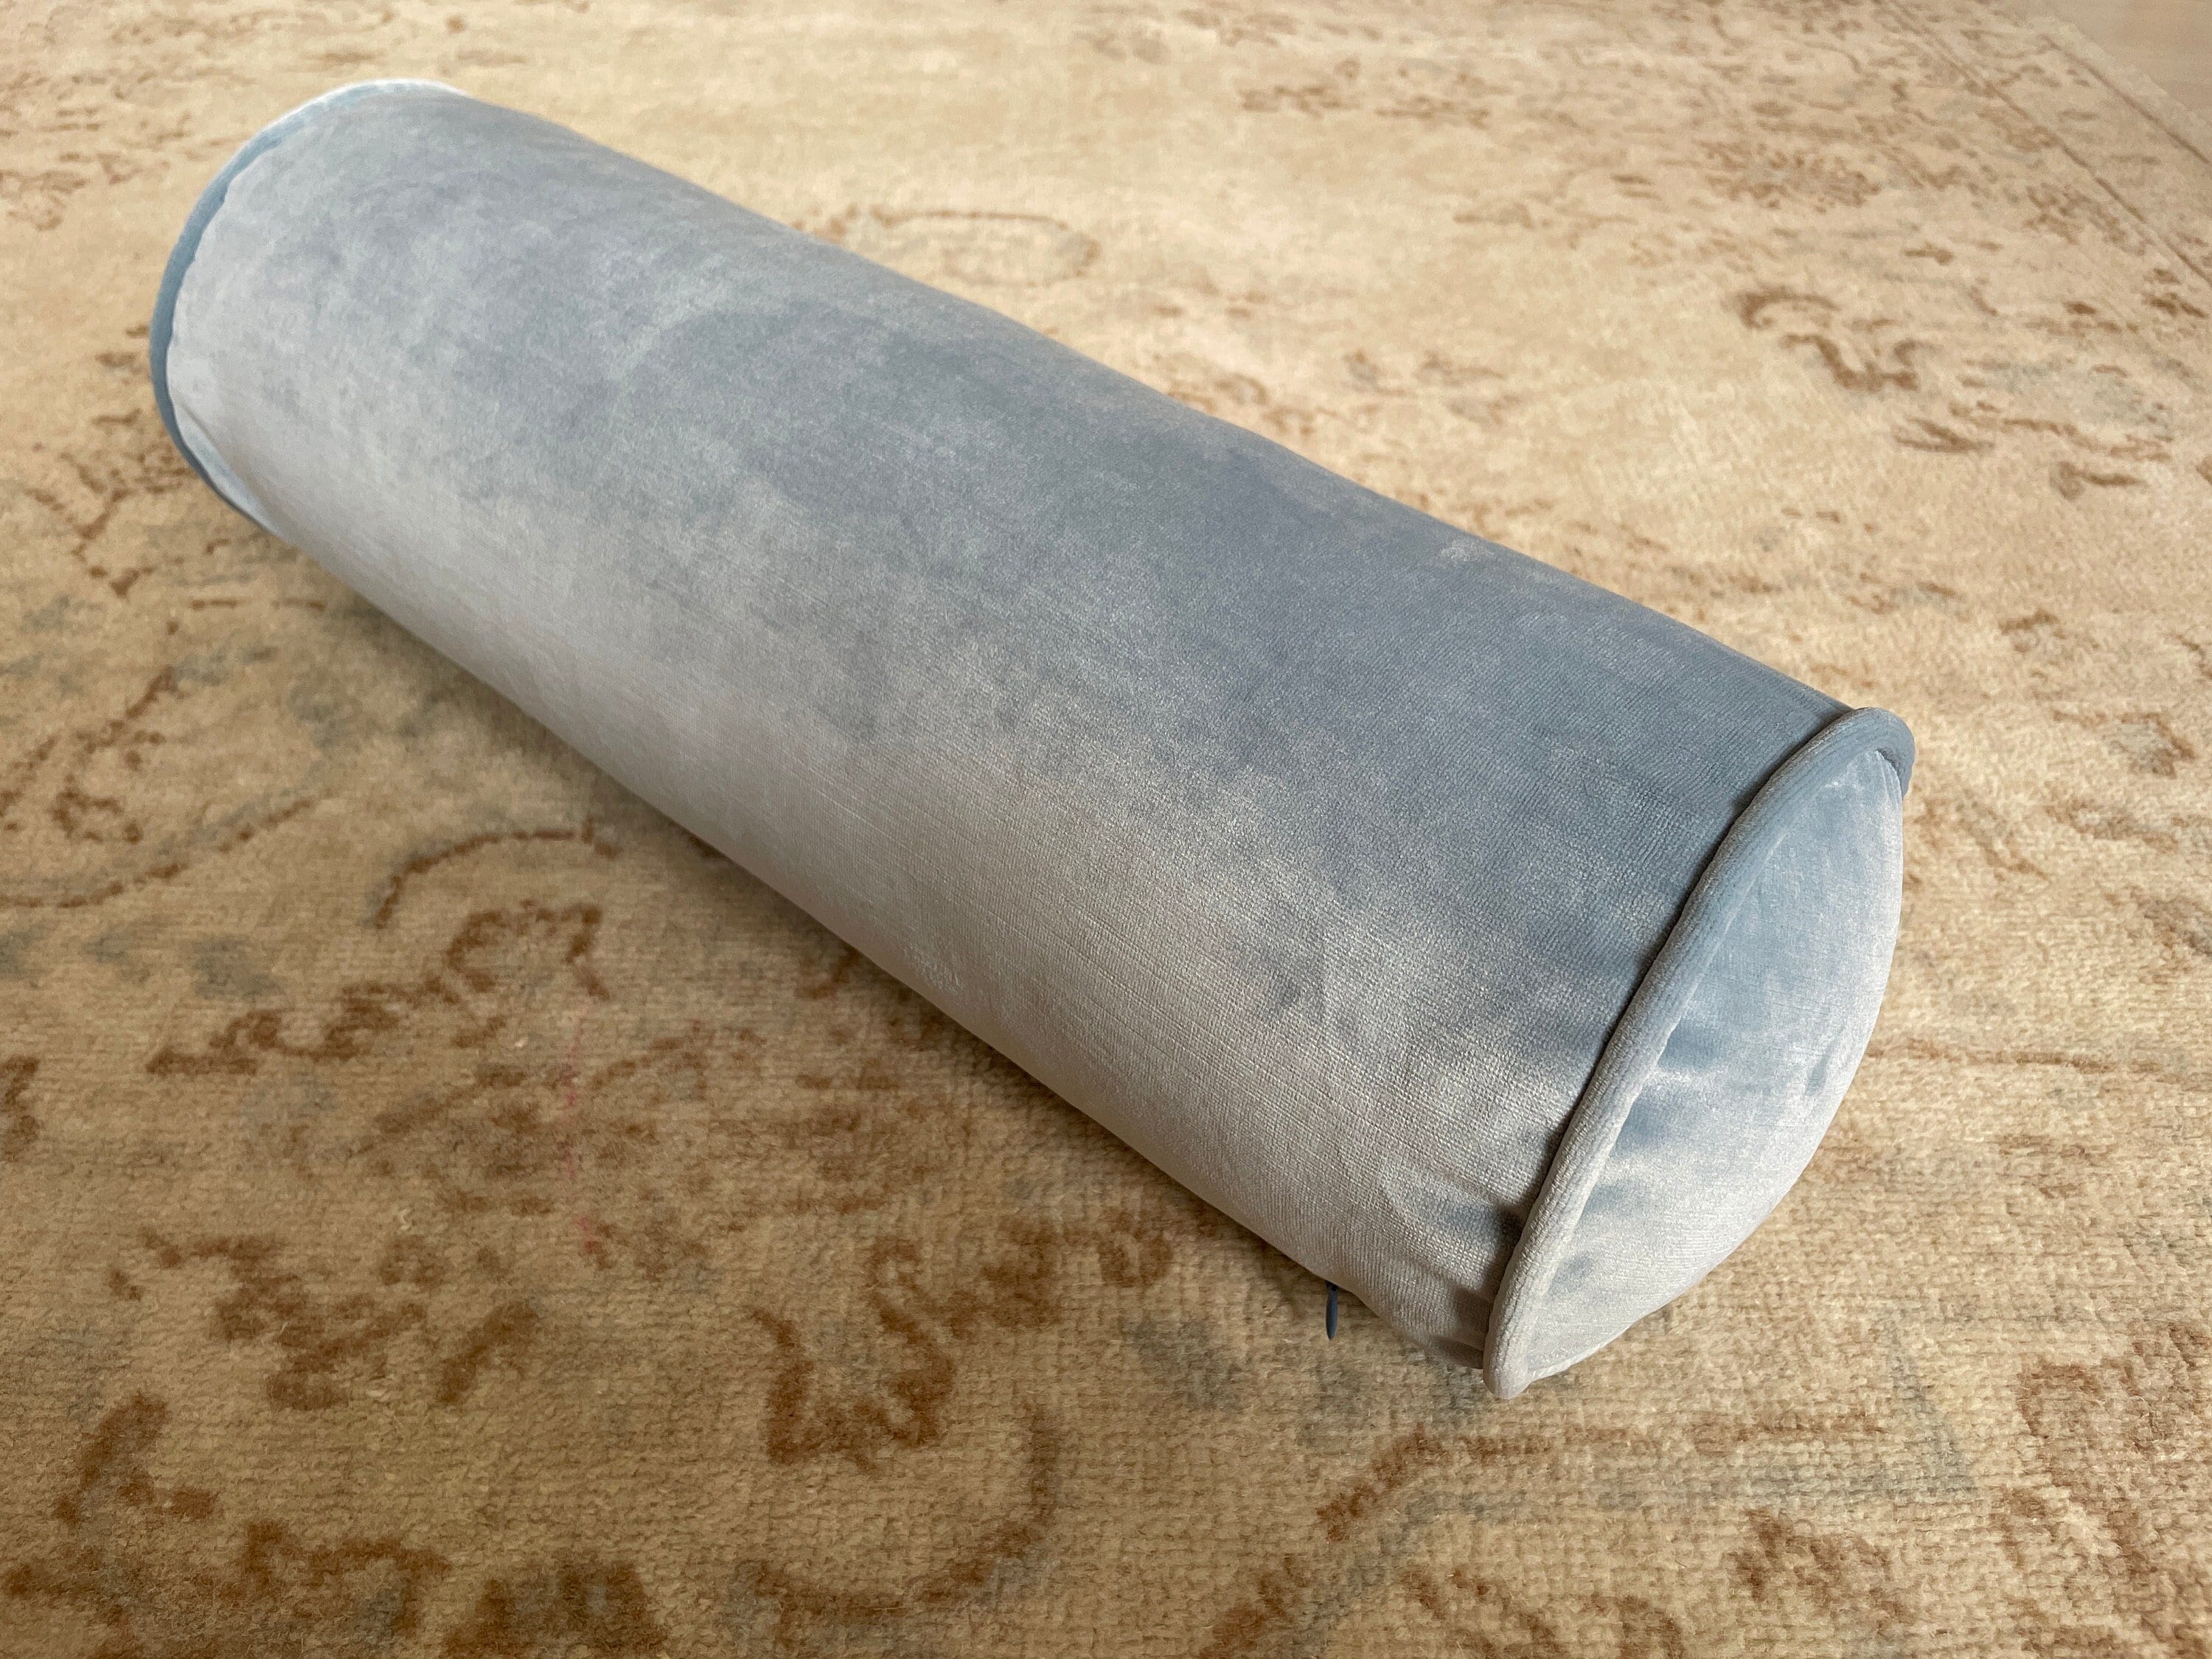 Extra Long Velvet Bolster Pillow With Piping and a Dacron-wrapped